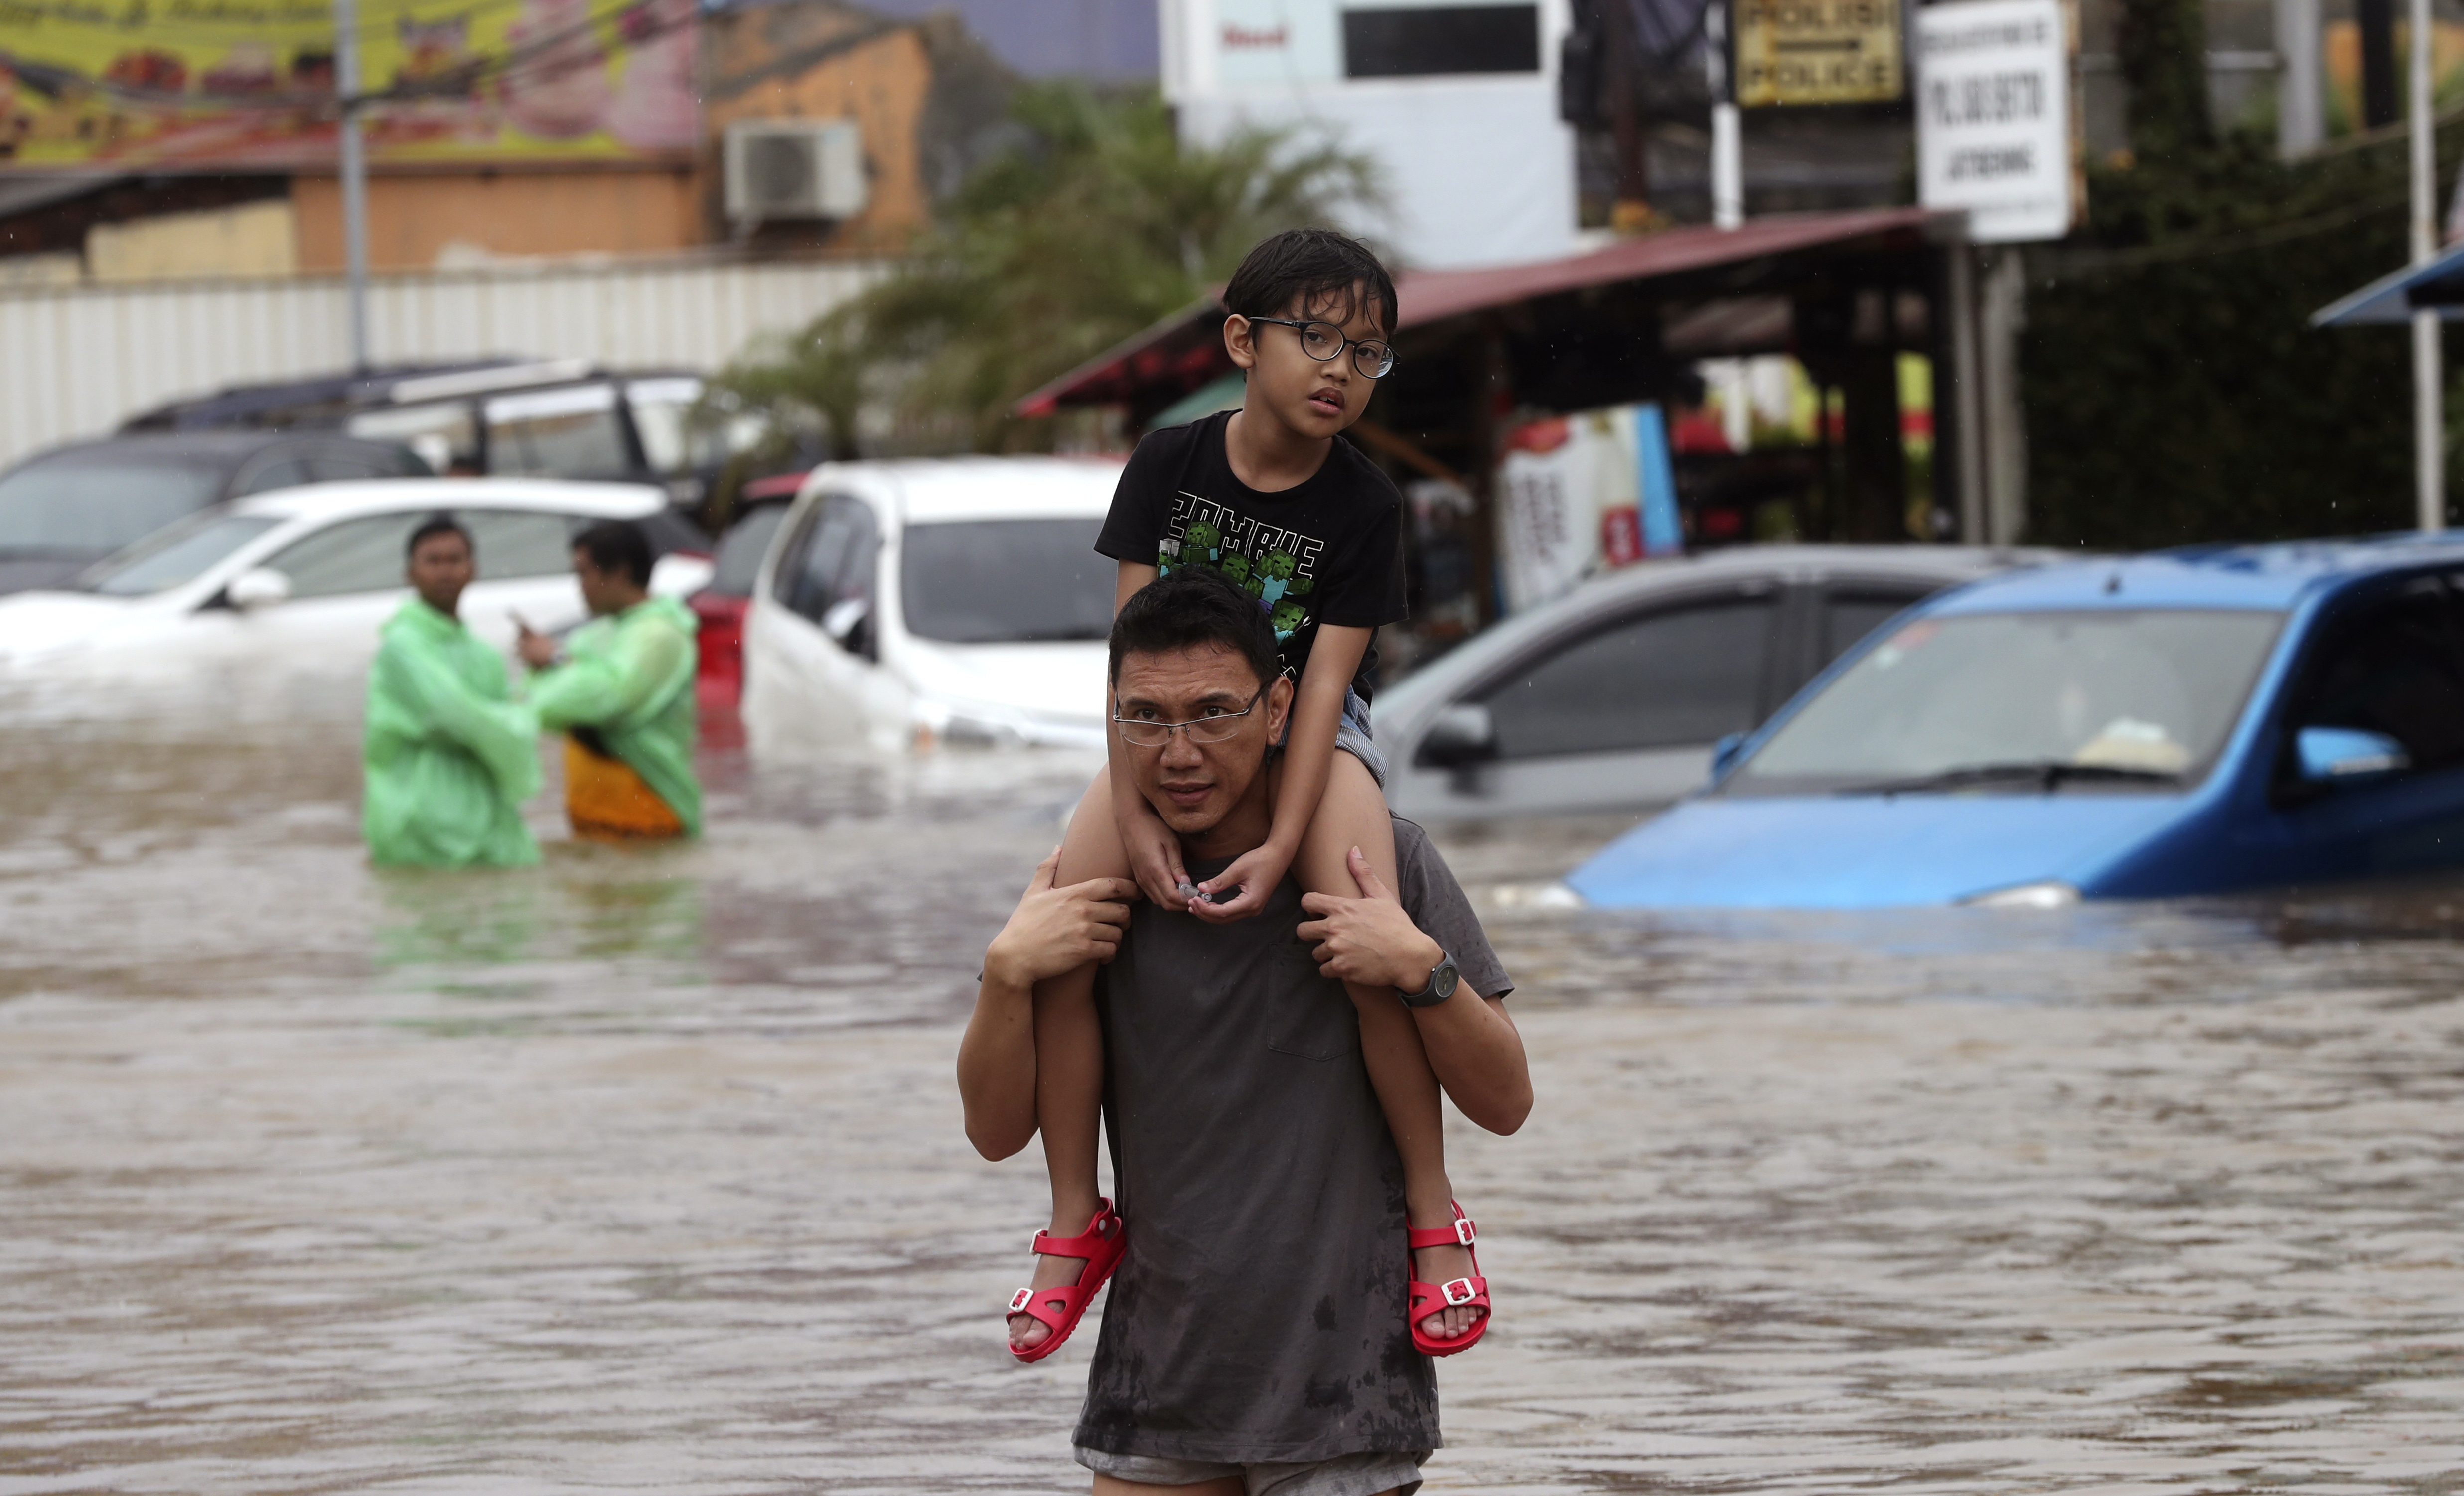 Indonesia Flooding Kills 66: Here's What to Know | Time